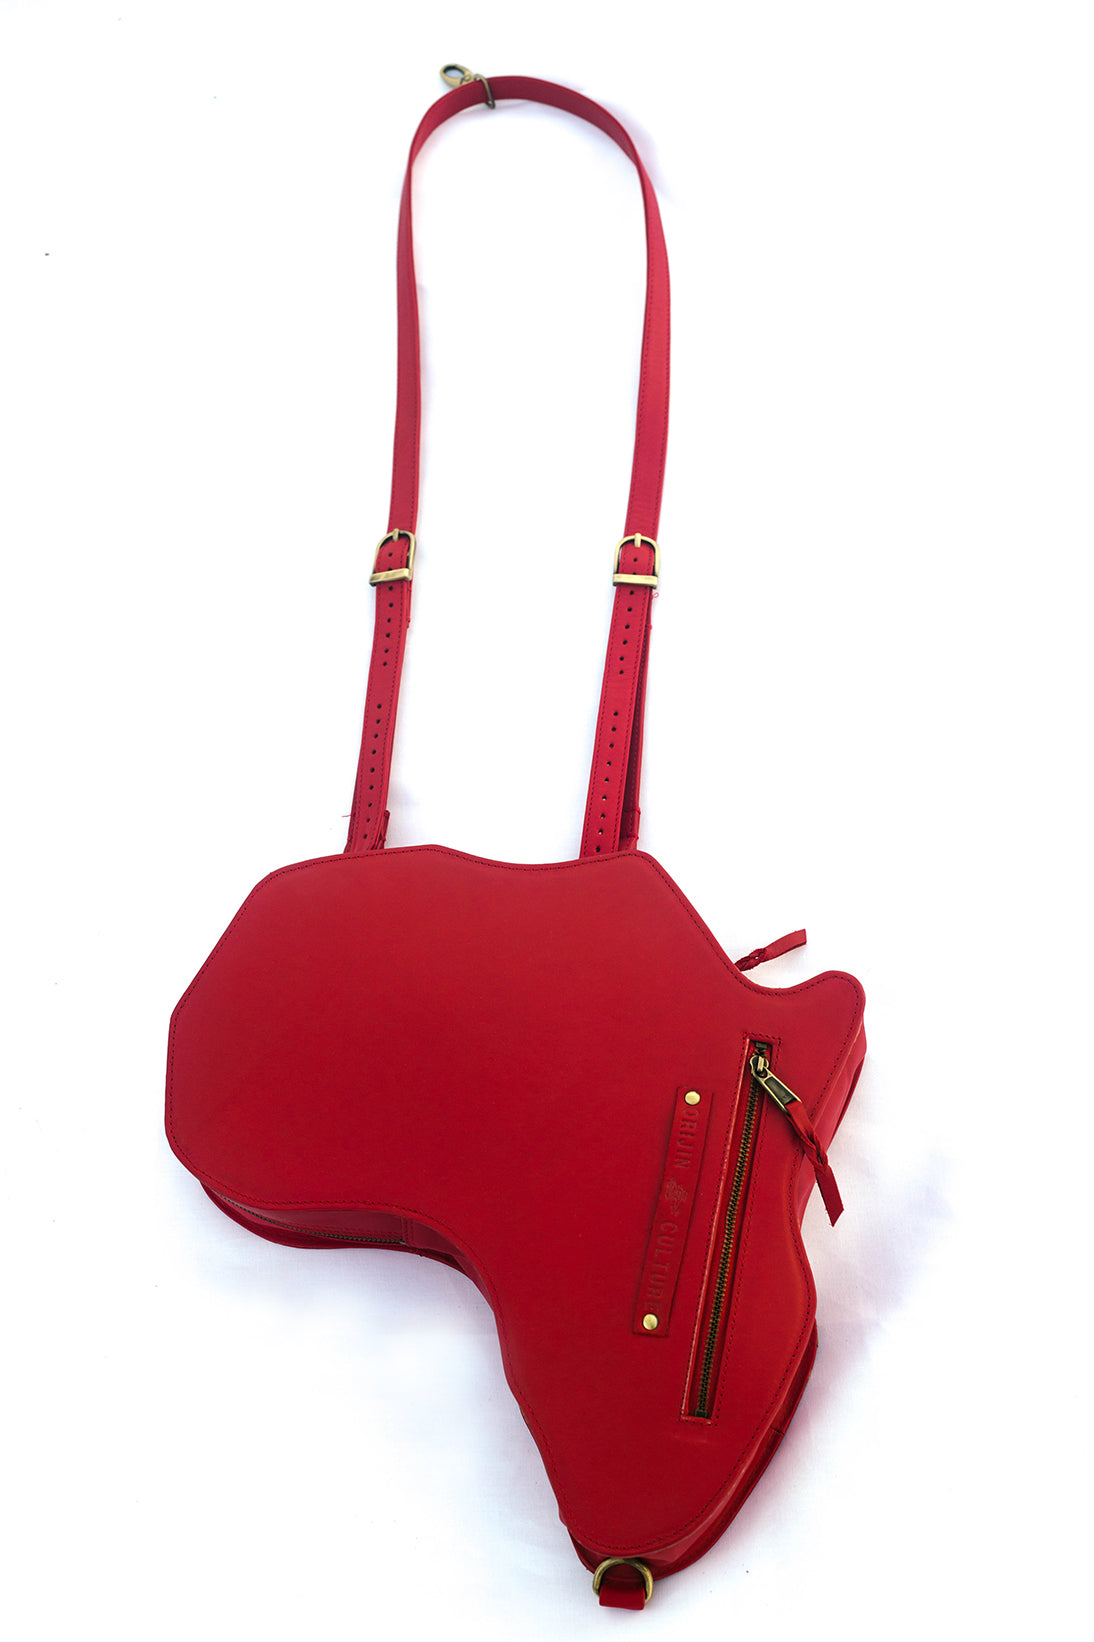 Africa Fanny Pack/ CrossBody Bag - Red Leather